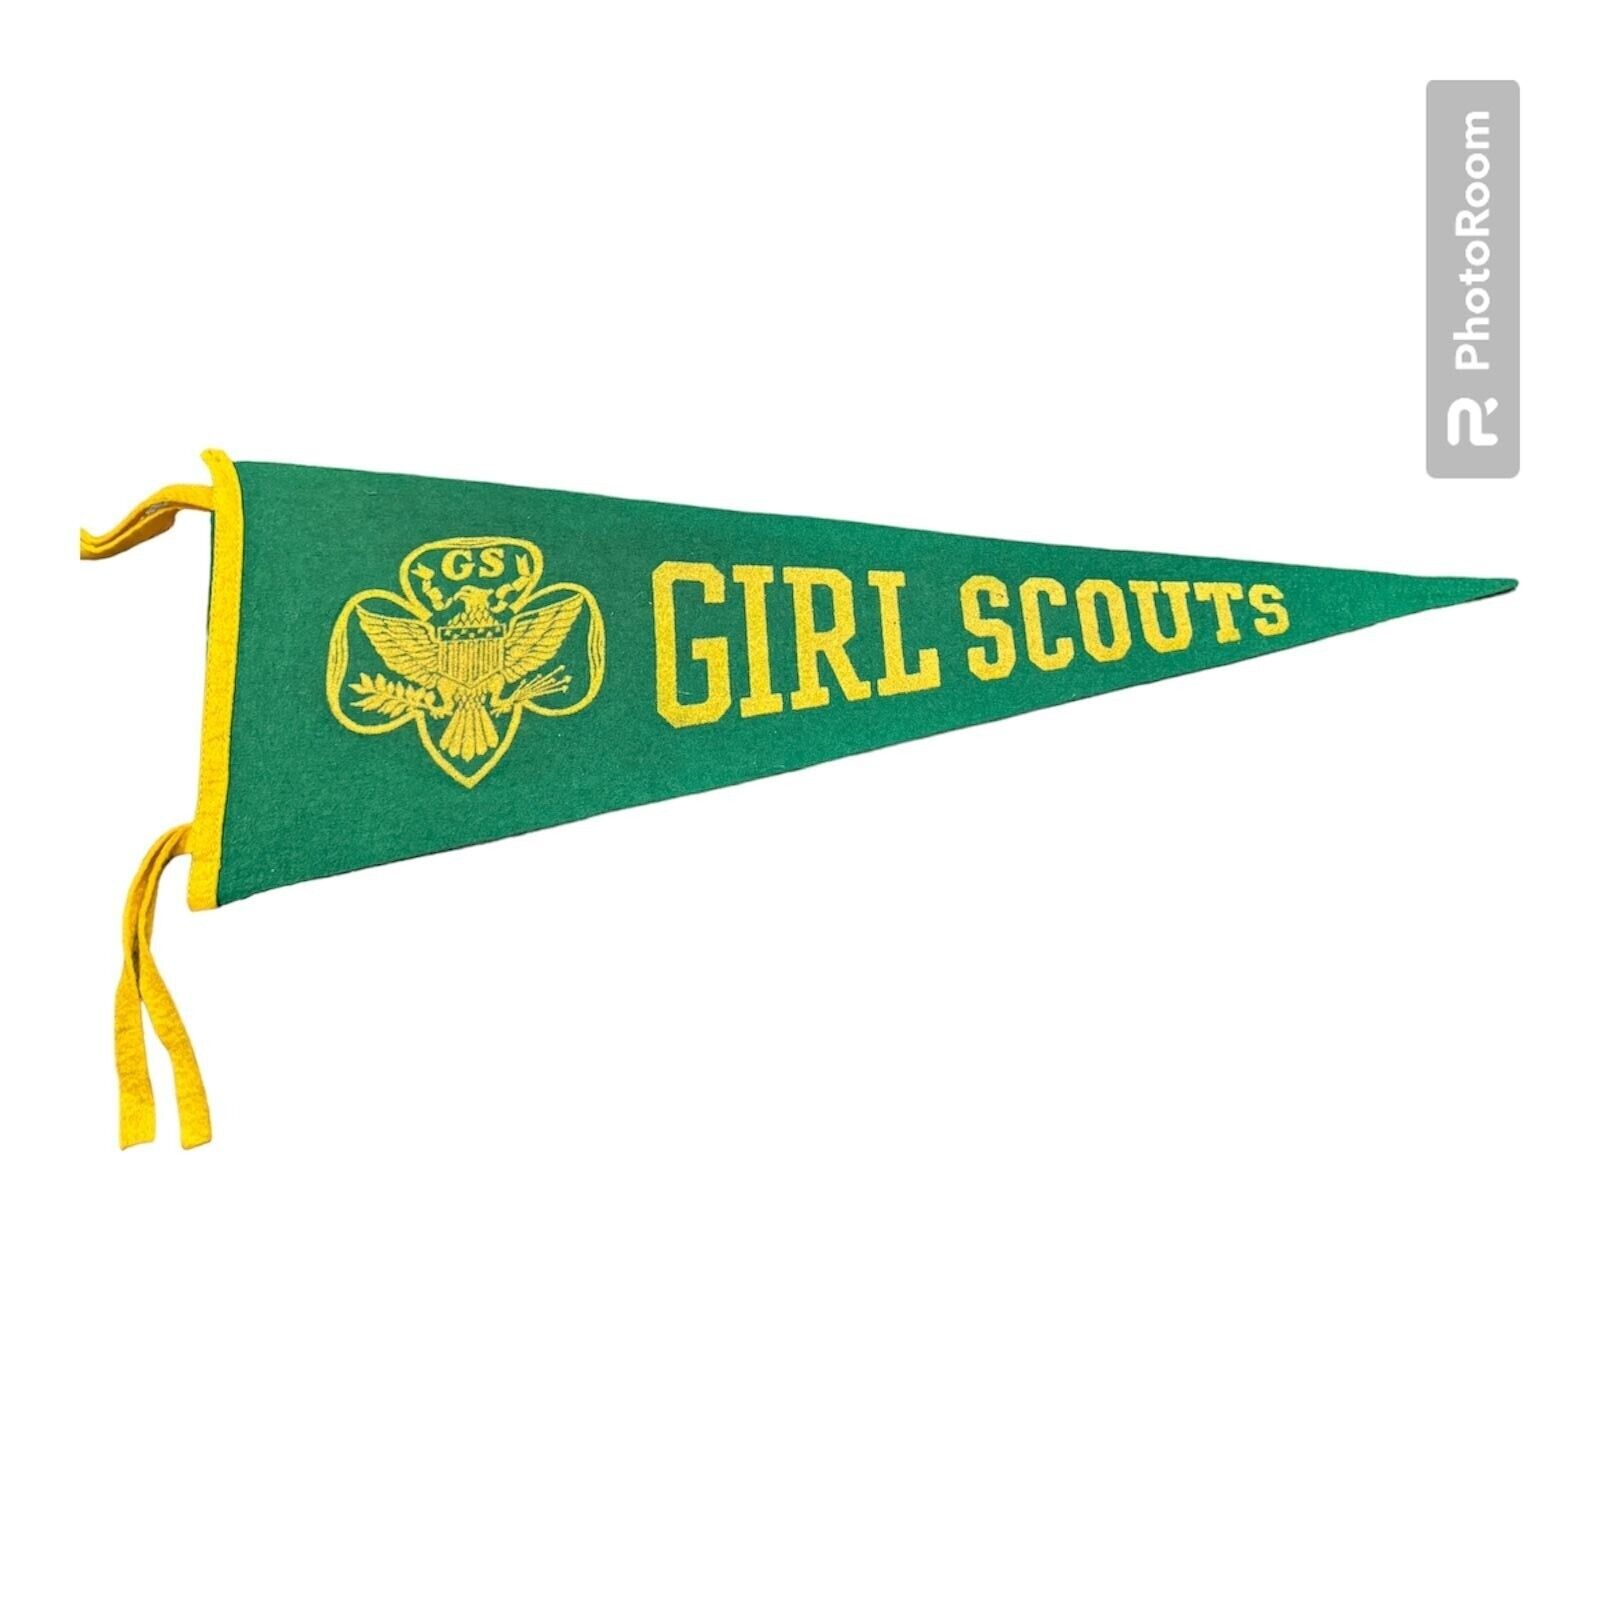 Vintage Girl Scouts Felt Pennant- Great Shape Circa 1970s